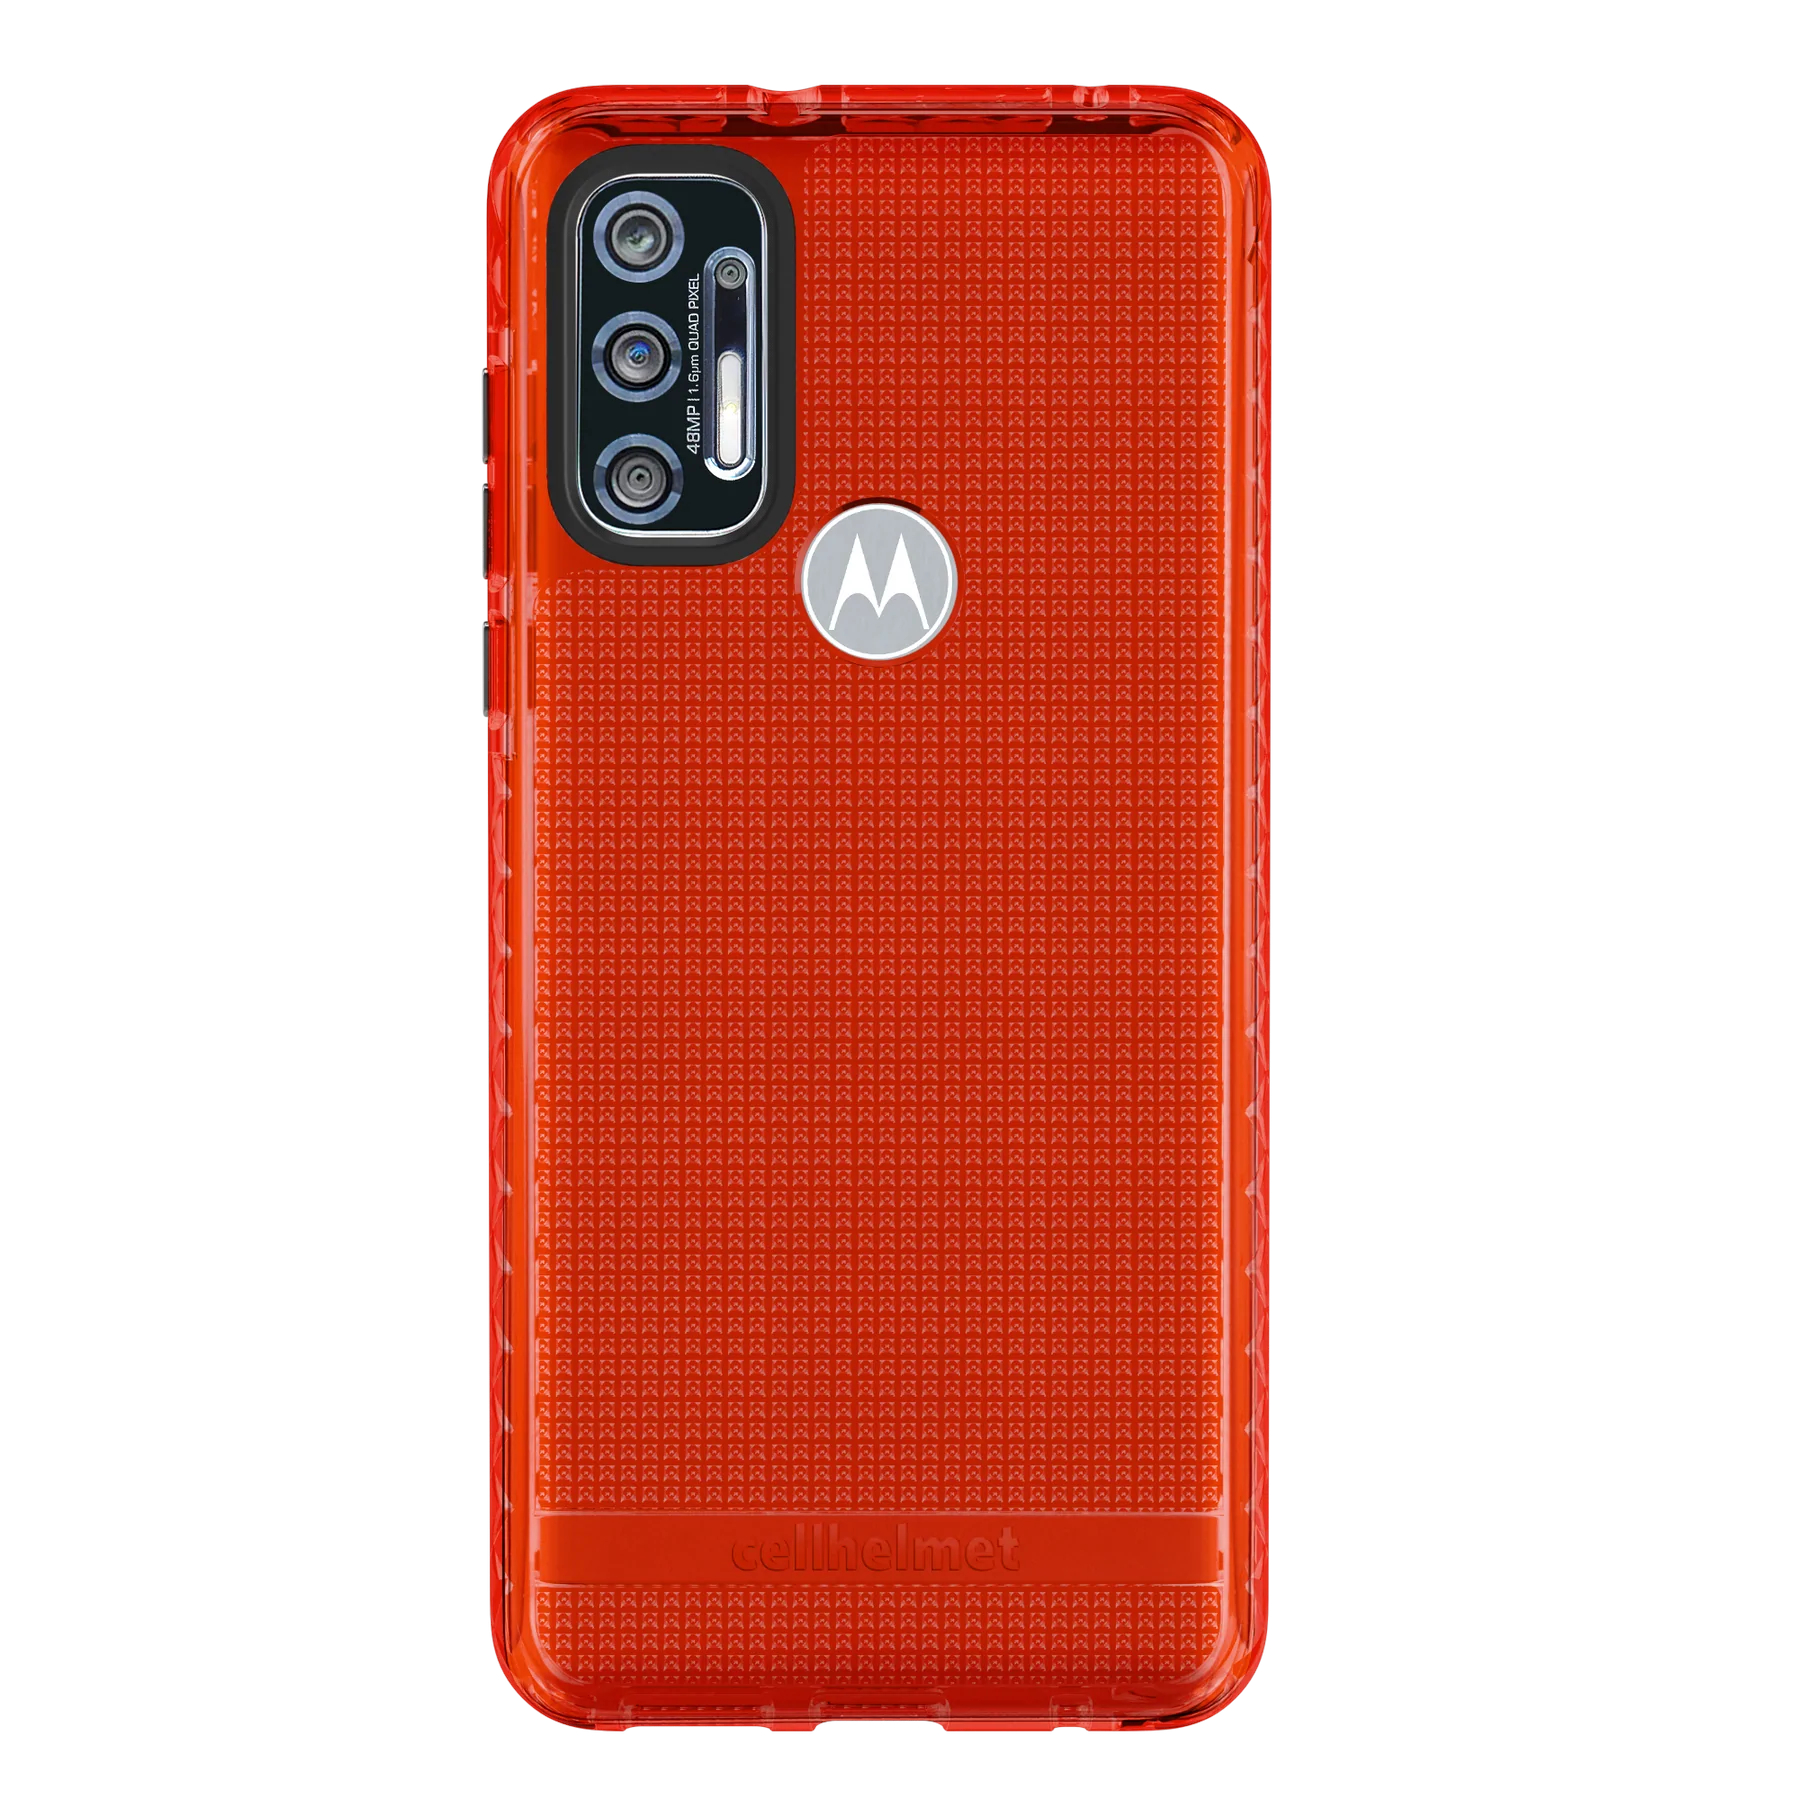 A product image of a red Cellhelmet Attitude X Series case for the Moto G Pure showing the back of the case attached to a phone.